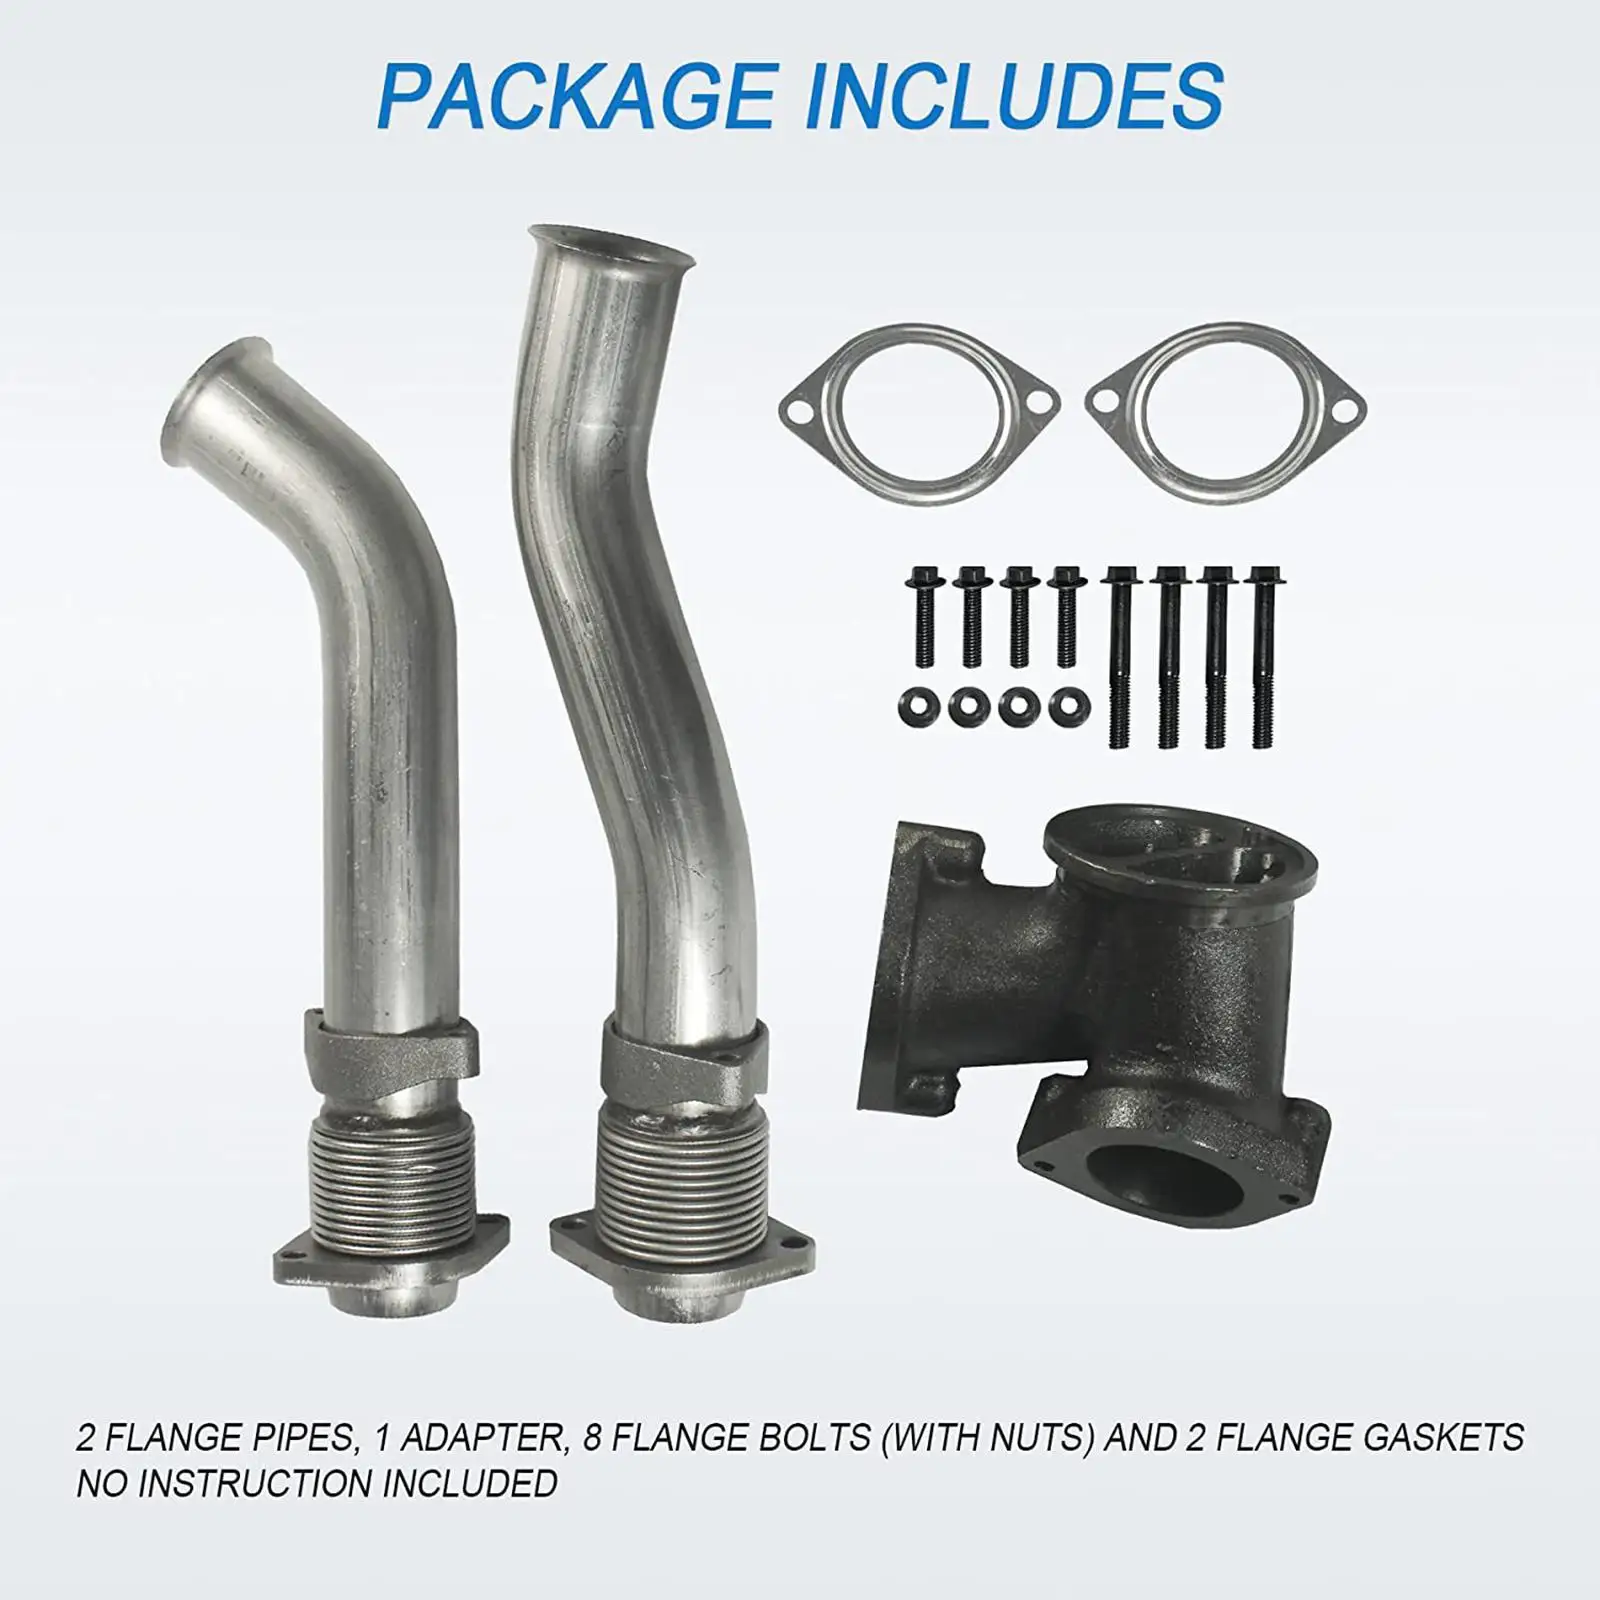 Turbocharger up Pipe Kit 679-005 Repair Parts Diesel Turbine Pipe Kit for Ford